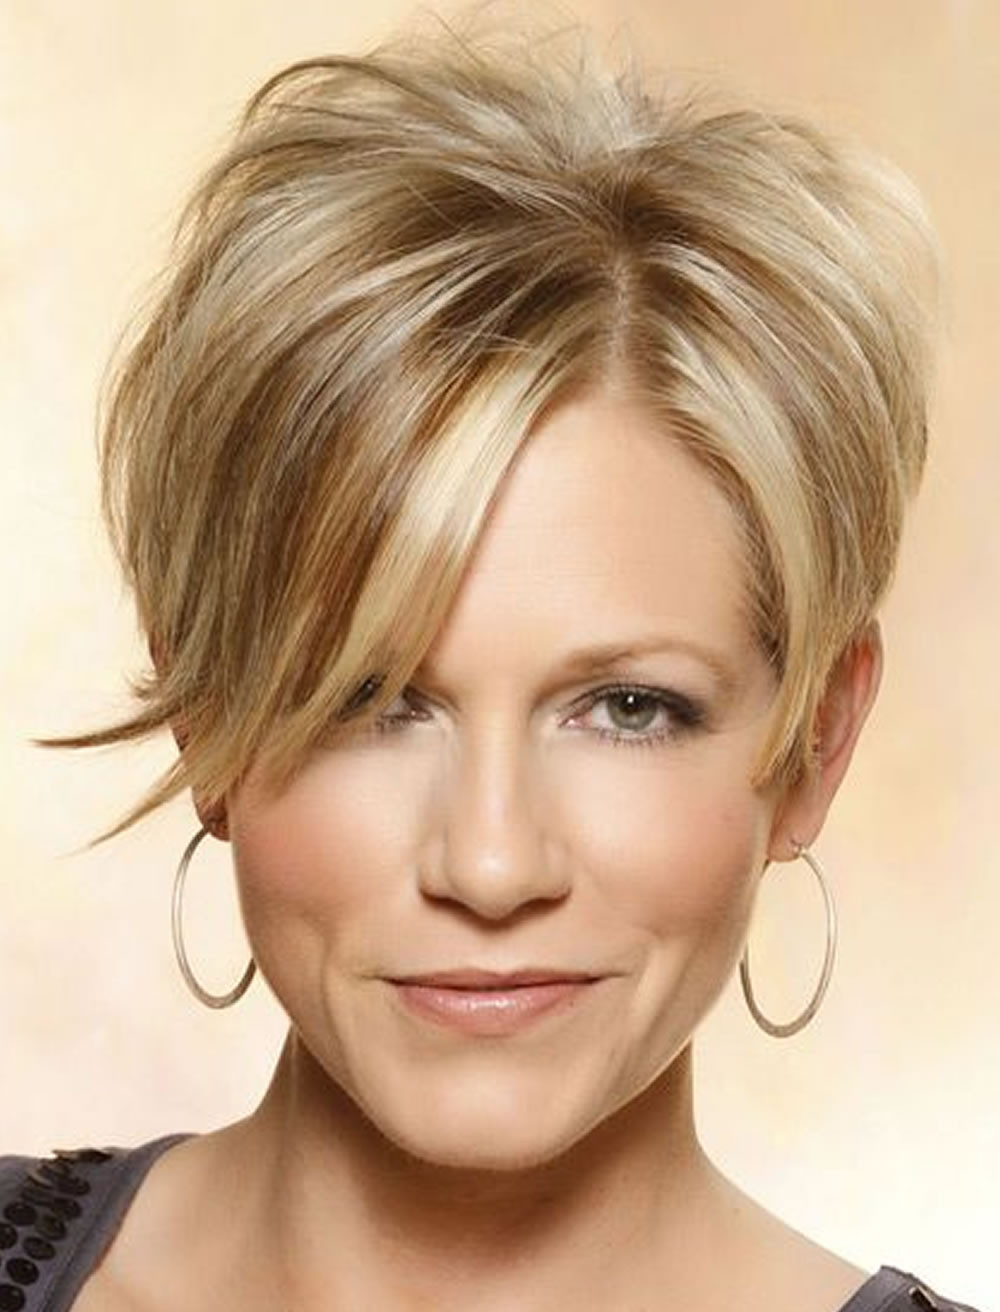 Best Short Haircuts For Women
 The Best Short Haircuts that are the most trendy for women